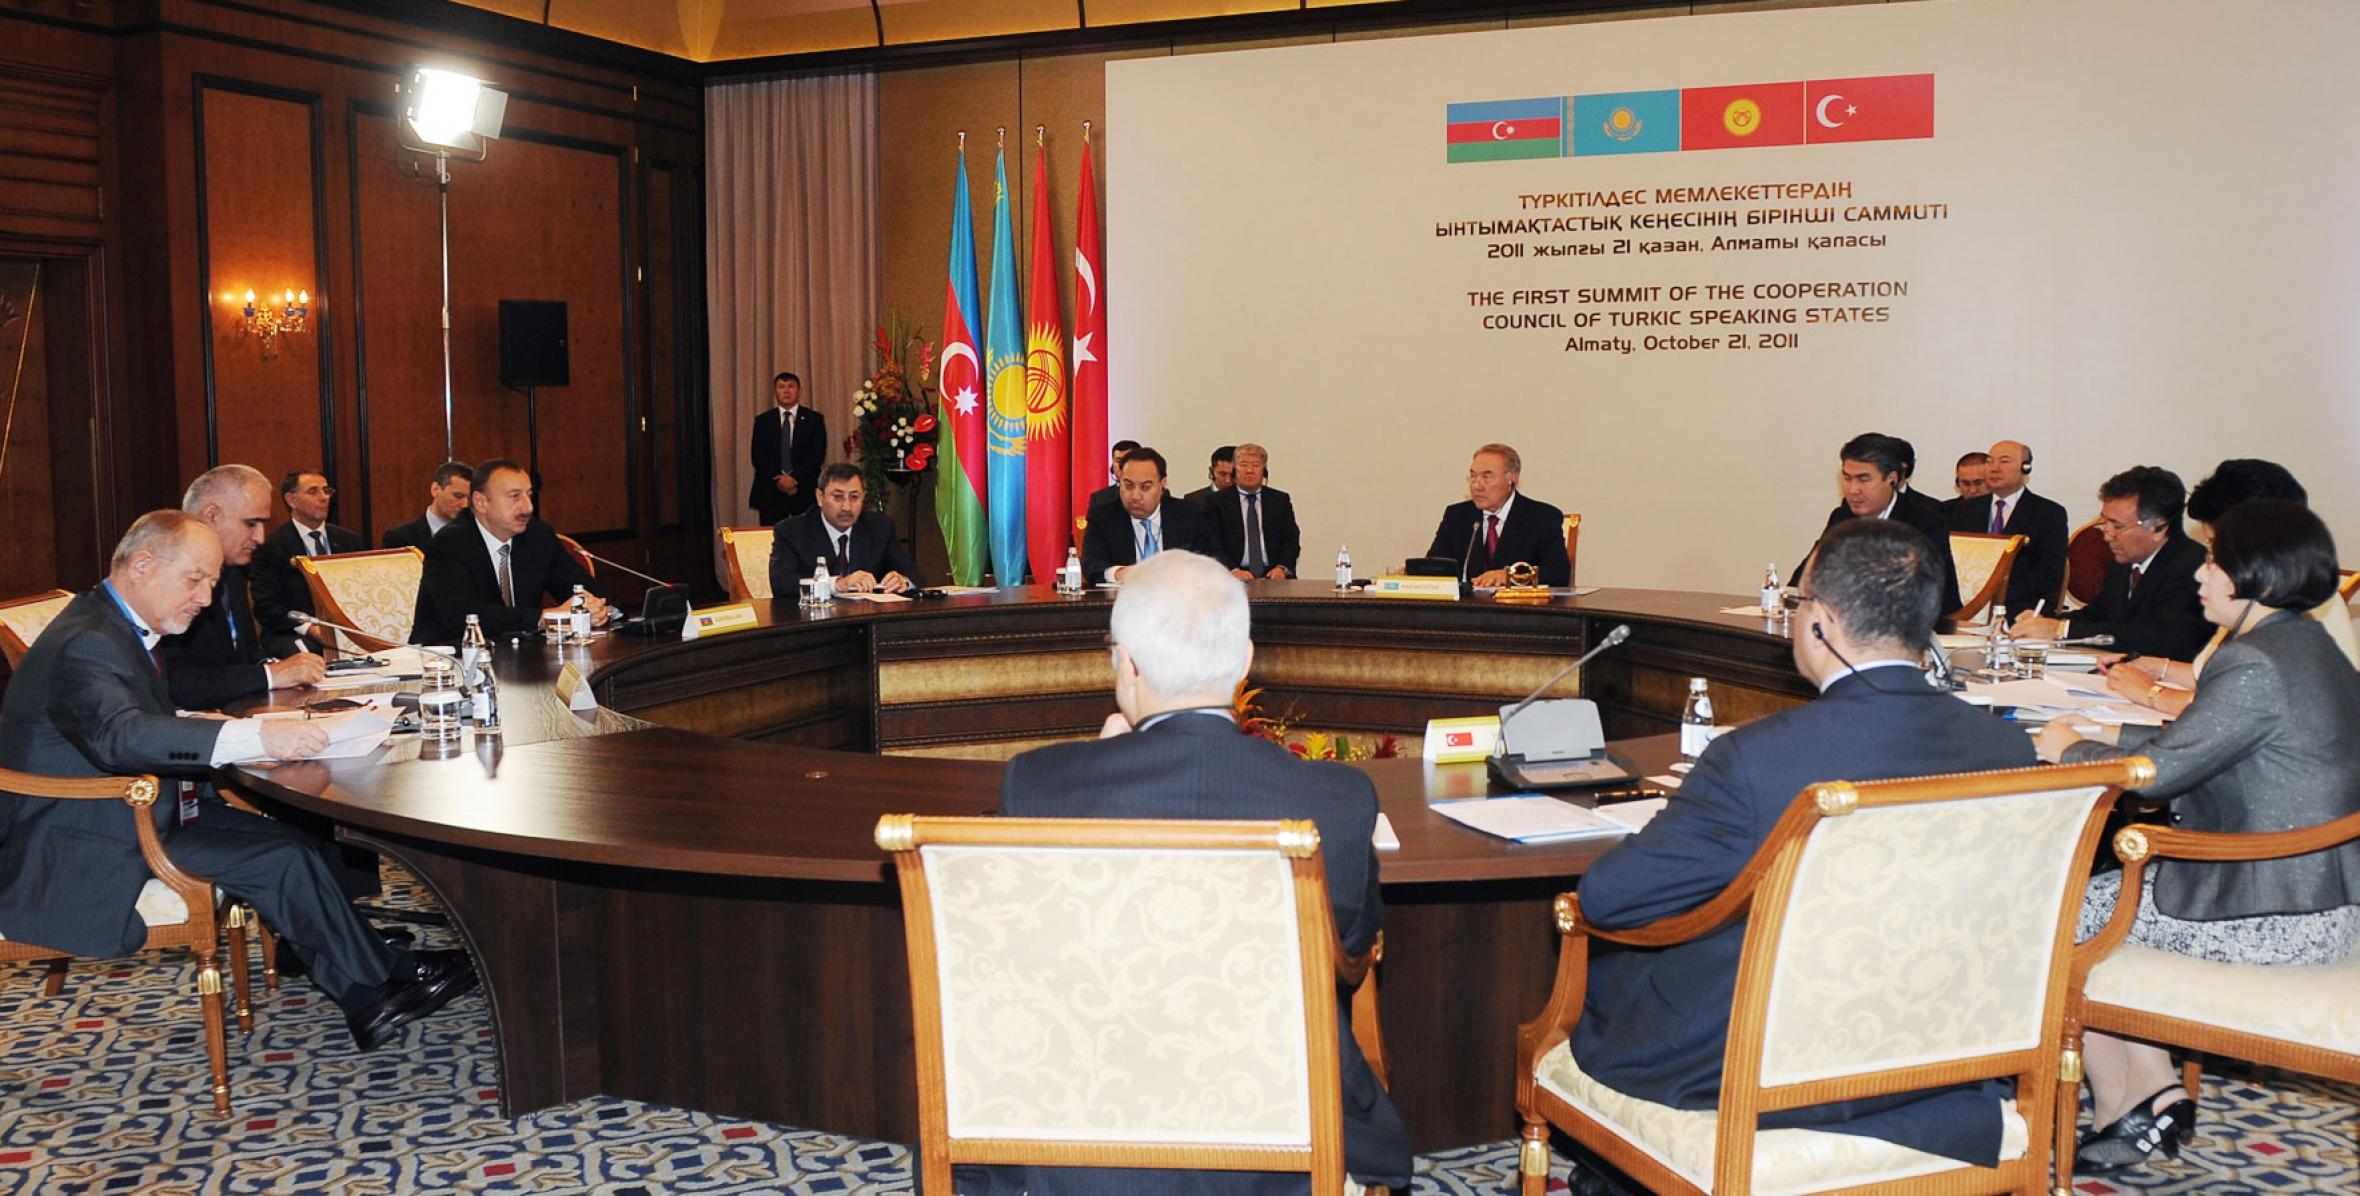 Ilham Aliyev attended the First Summit of the Cooperation Council of Turkic Speaking States